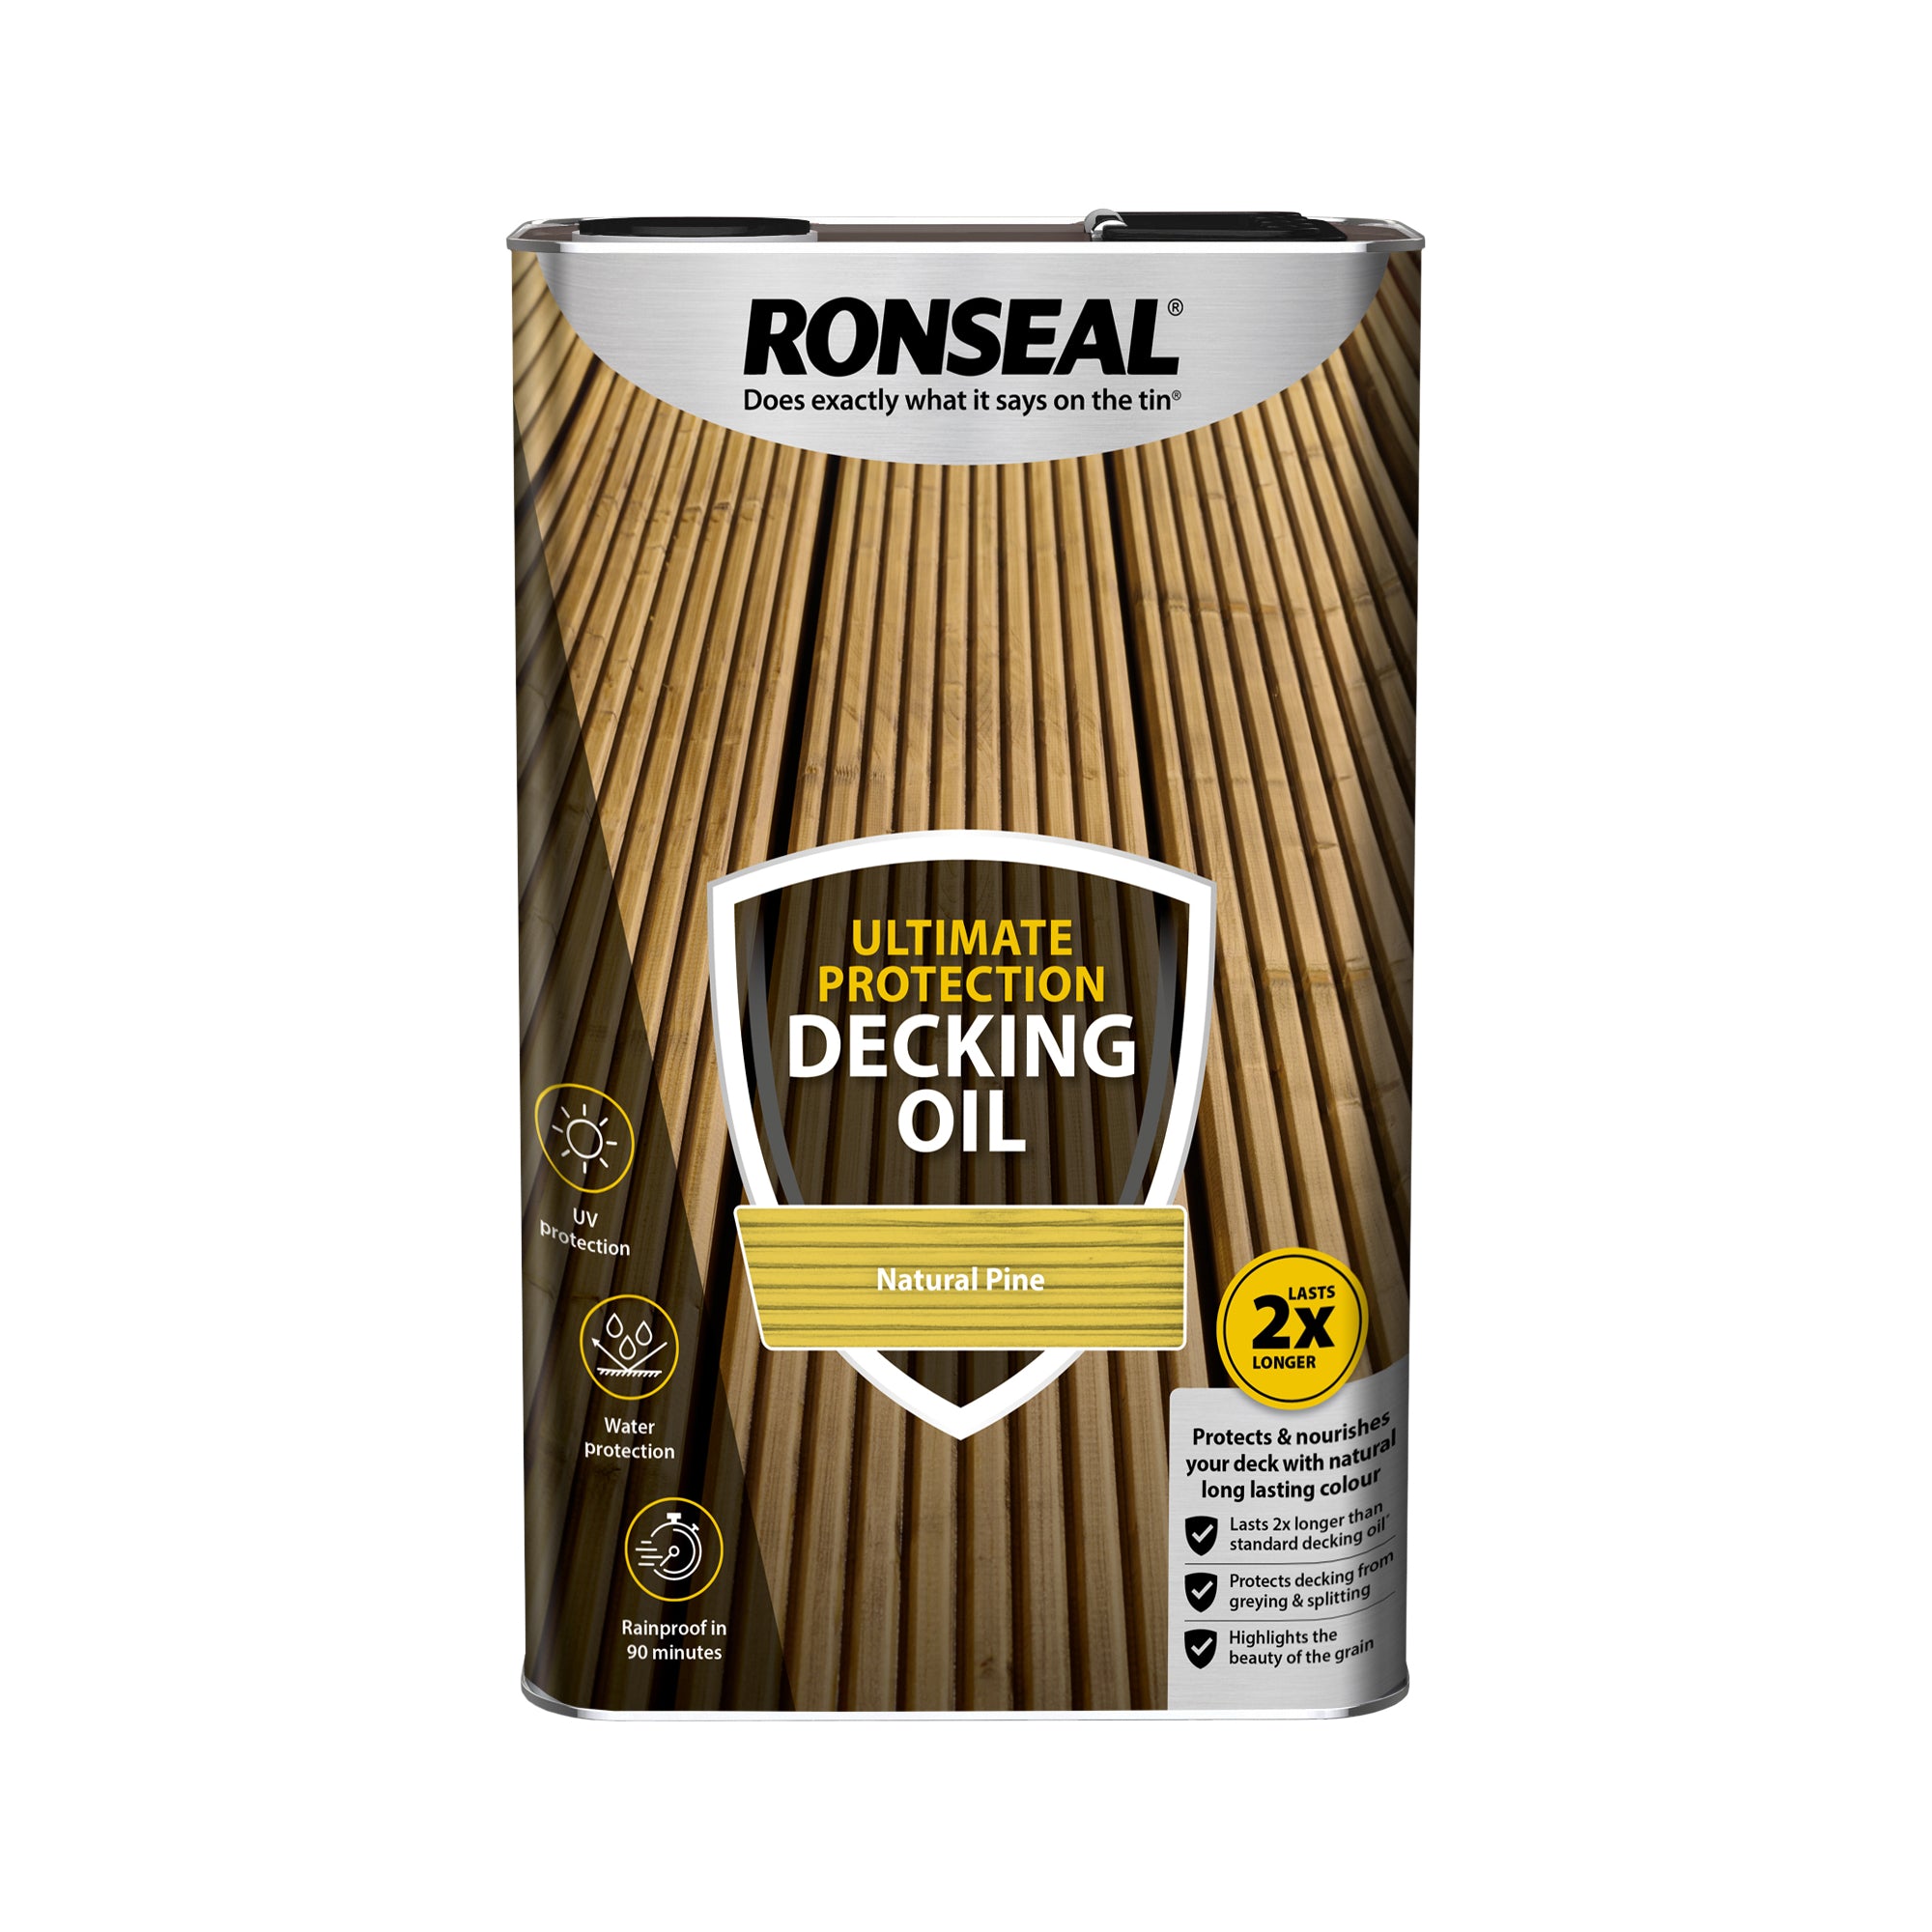 Ronseal-Ultimate-Protection-Decking-Oil-Natural-Pine-5L